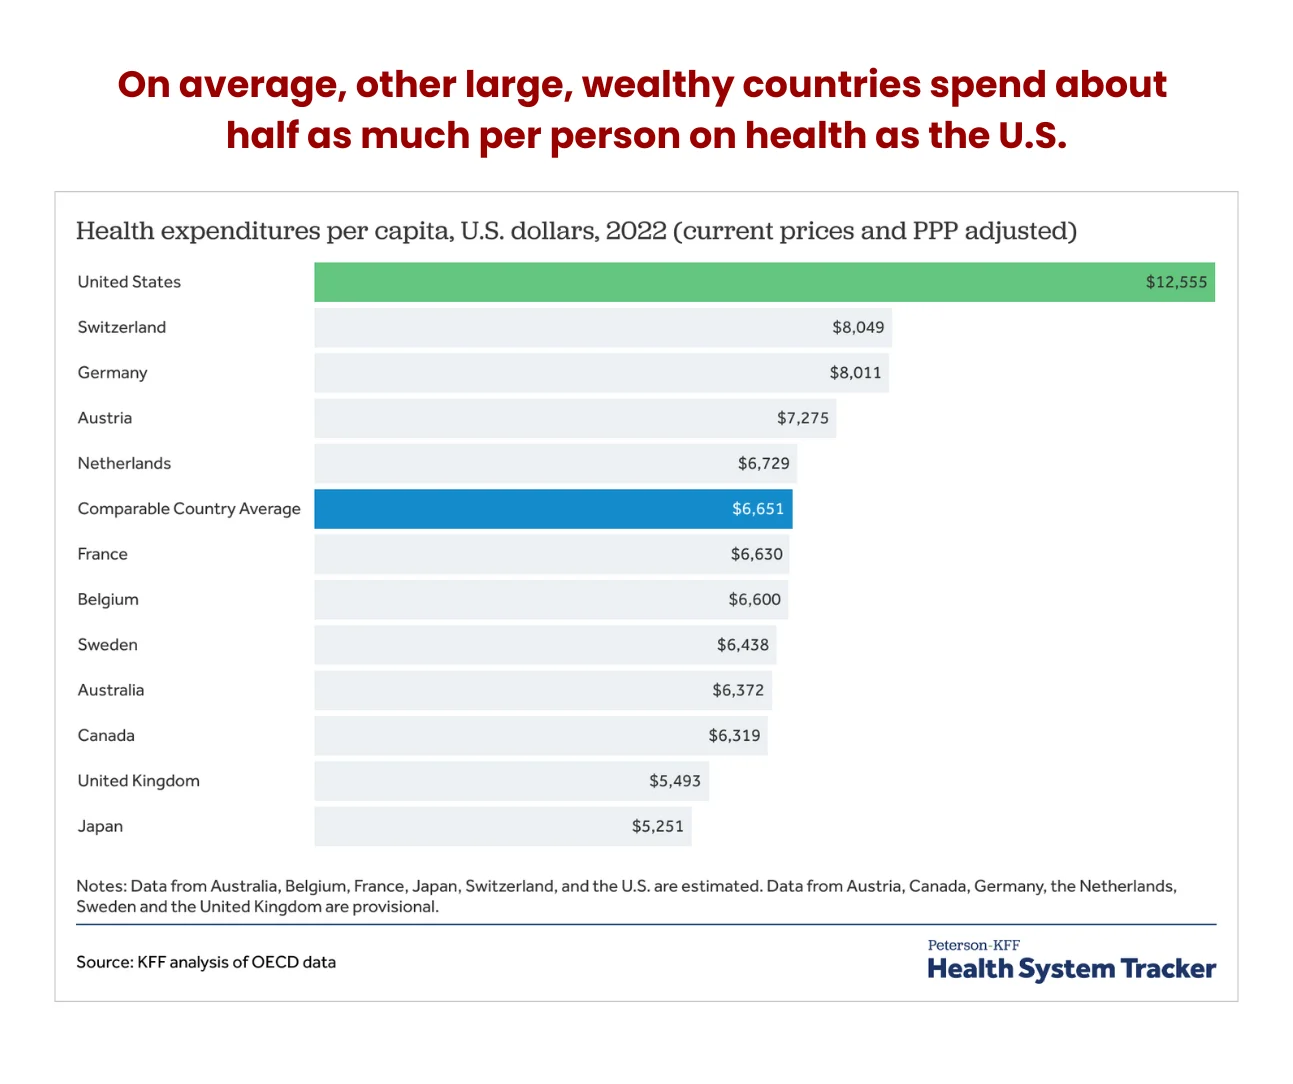 health-expenditures-per-capita-u.s.-dollars-2022-current-prices-and-ppp-adjusted